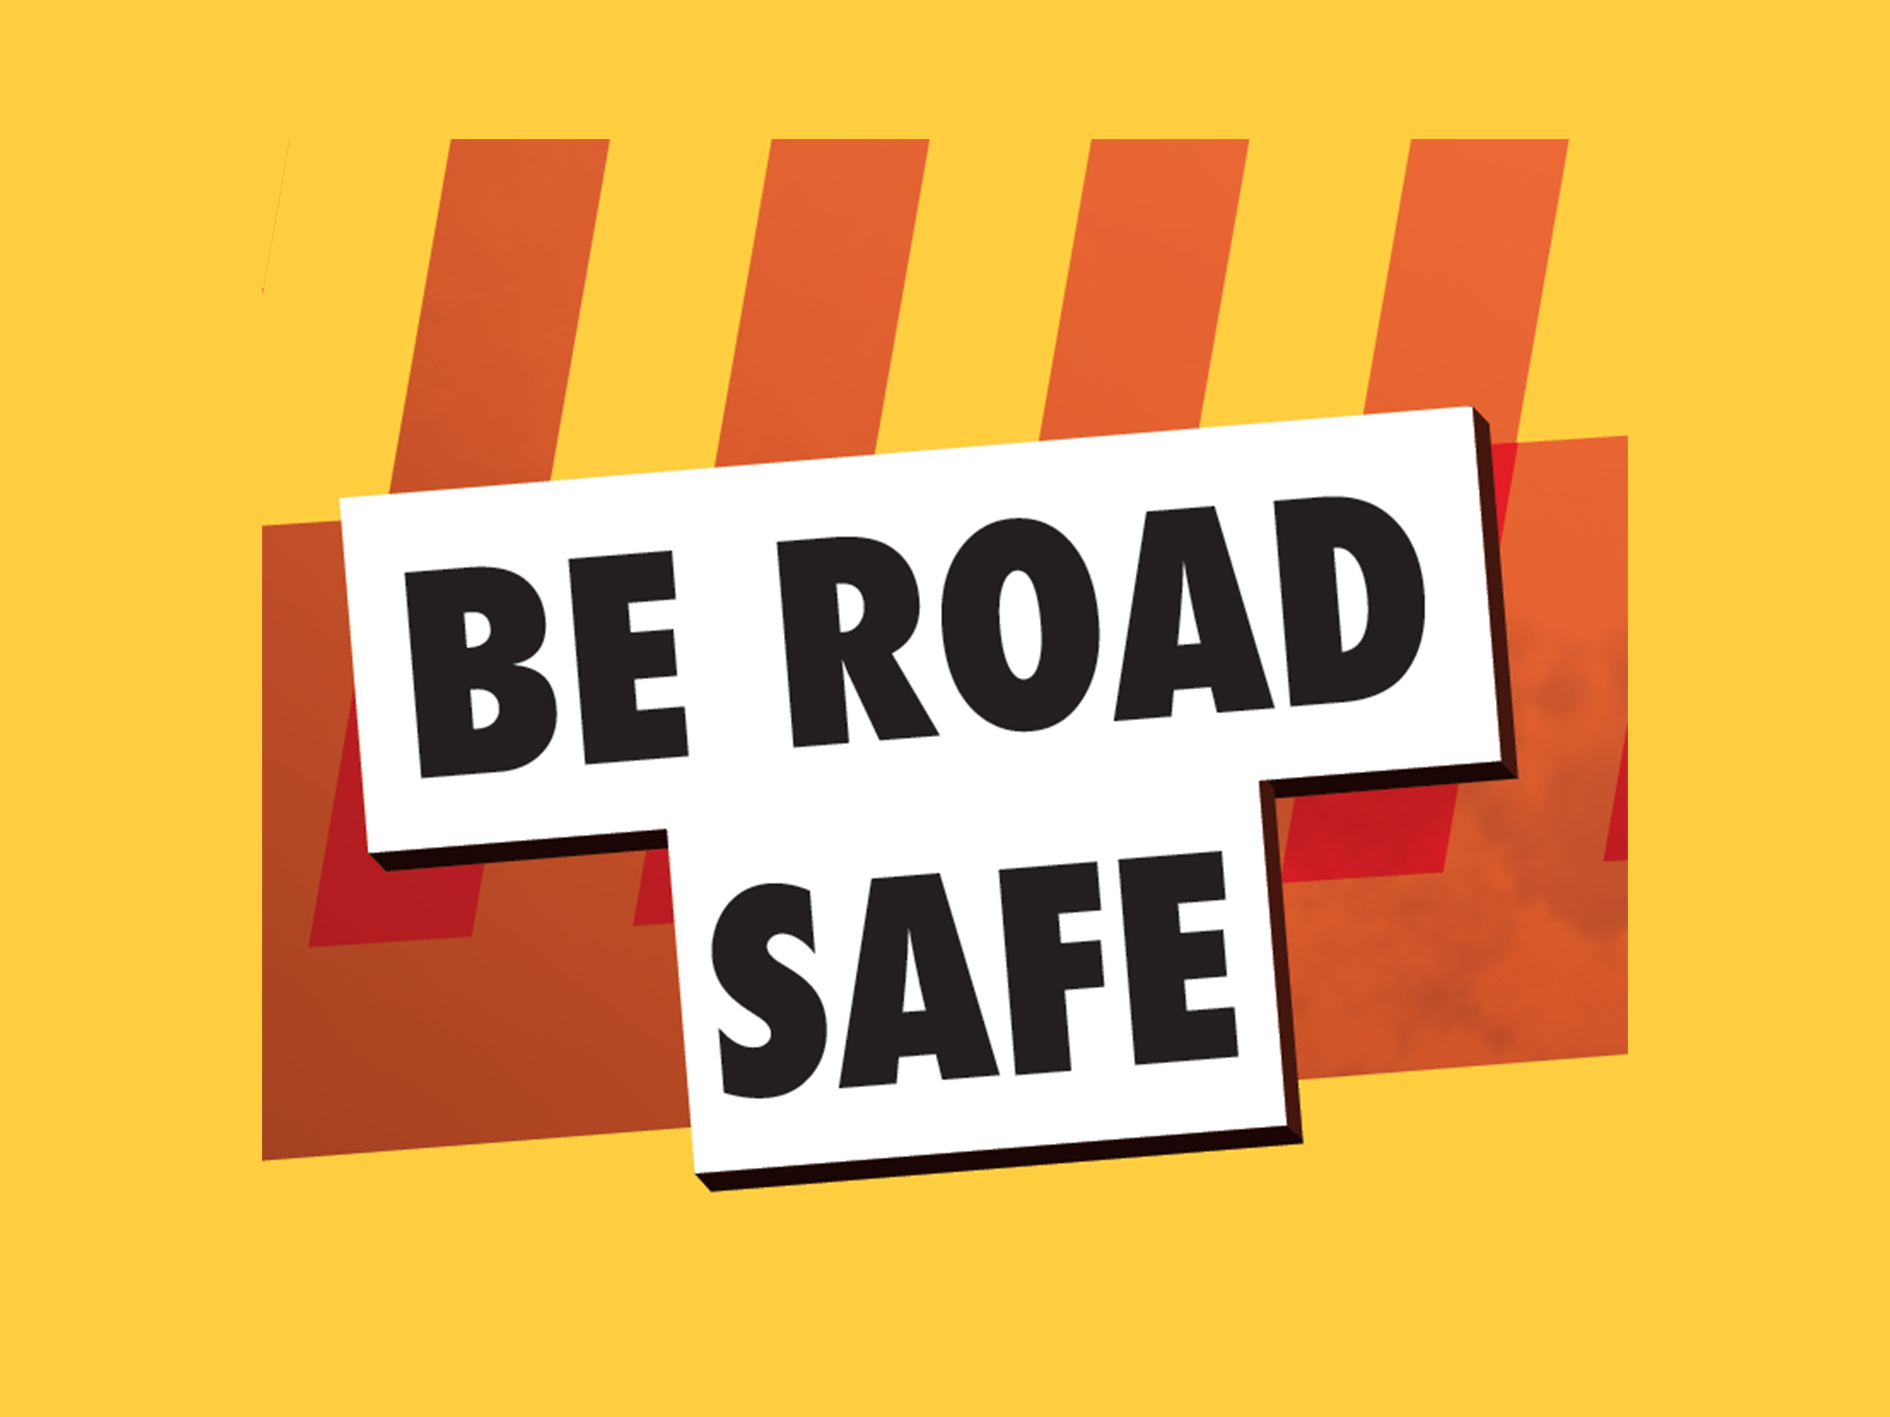 Section on be road safe